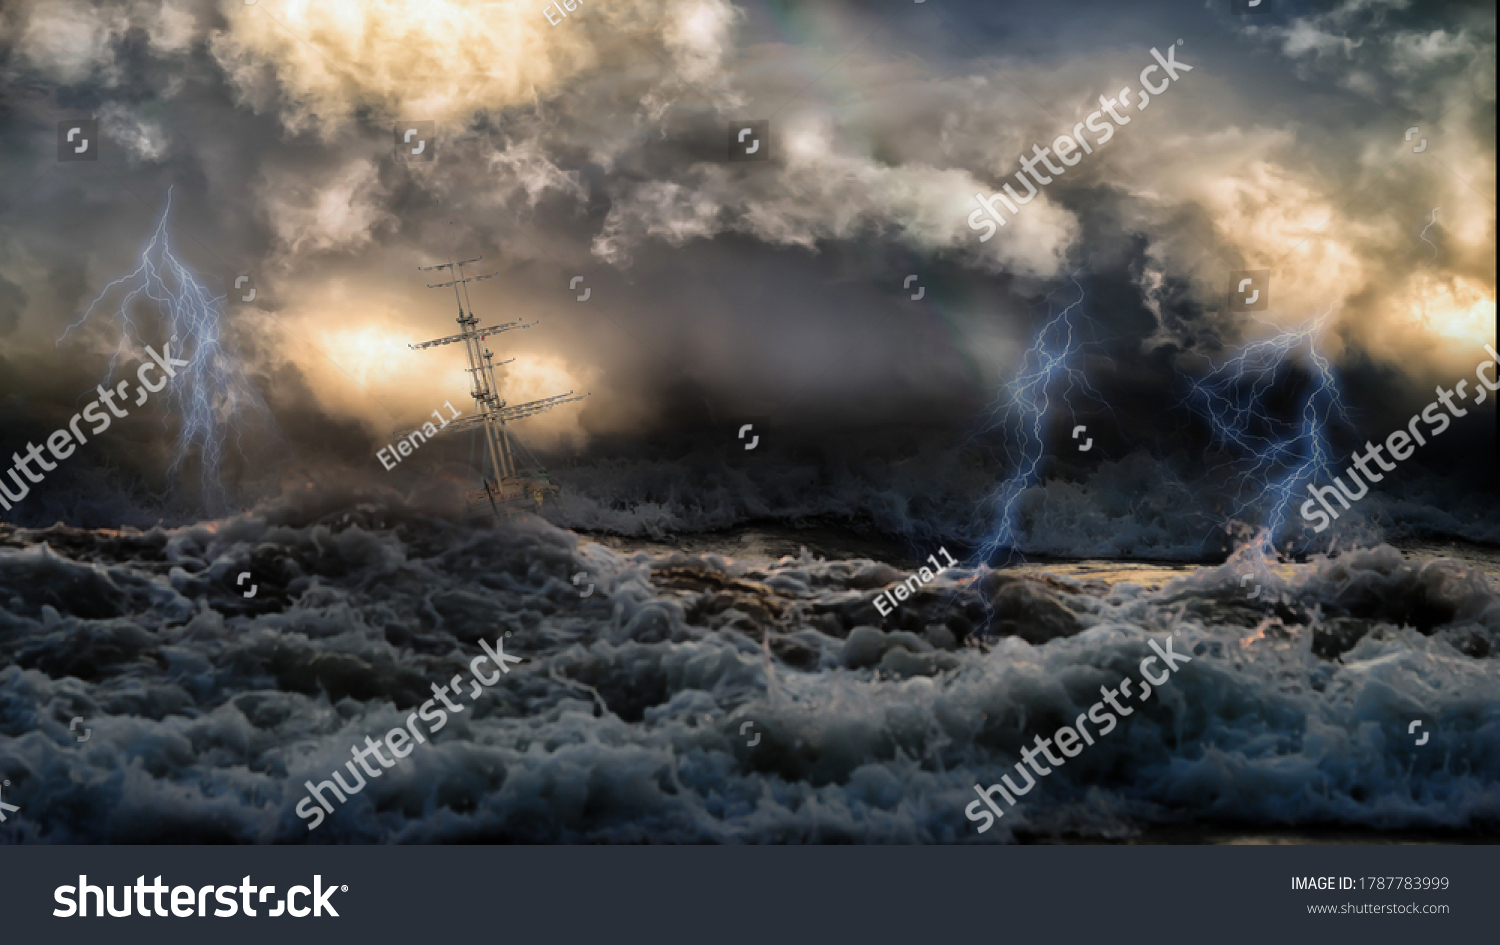 Silhouette of sailing old ship in stormy sea with lightning bolts and amazing waves and dramatic sky. Collage in the style of marine painters. #1787783999